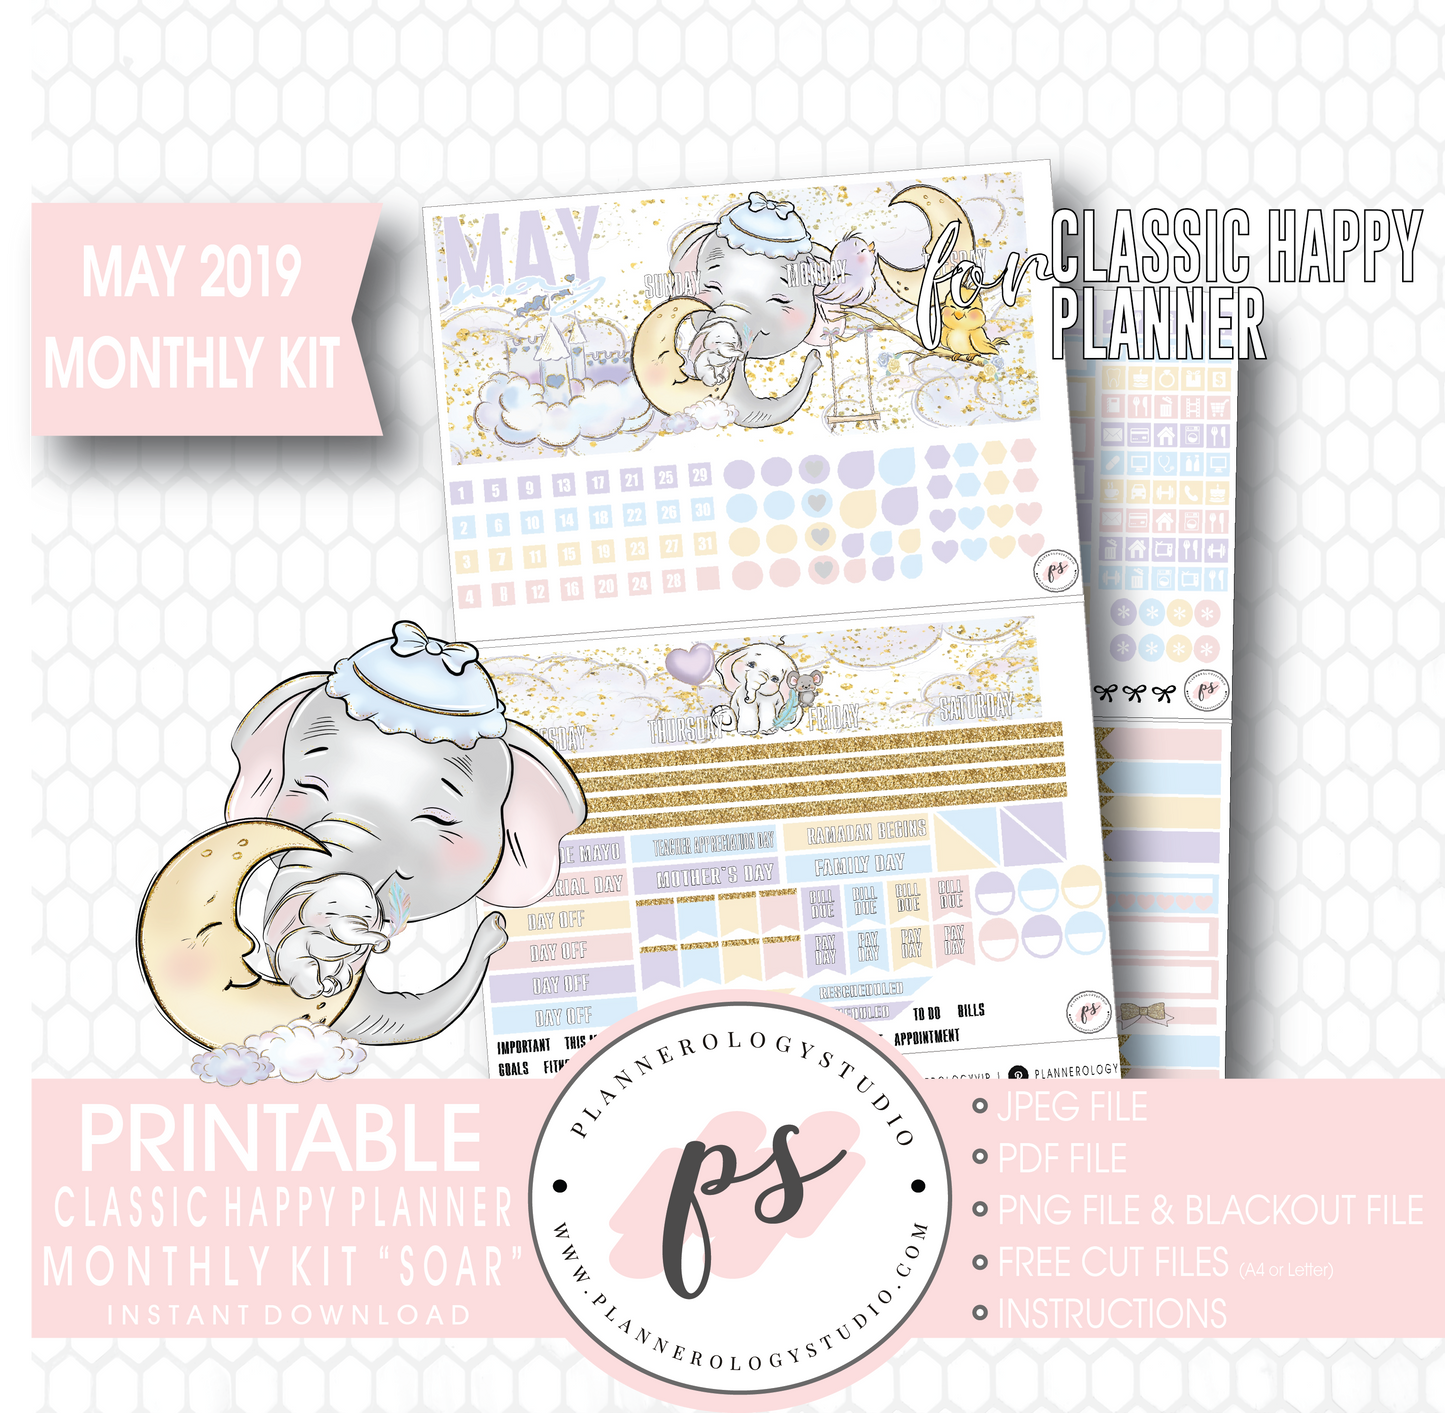 Soar (Dumbo Inspired) May 2019 Monthly View Kit Digital Printable Planner Stickers (for use with Classic Happy Planner) - Plannerologystudio